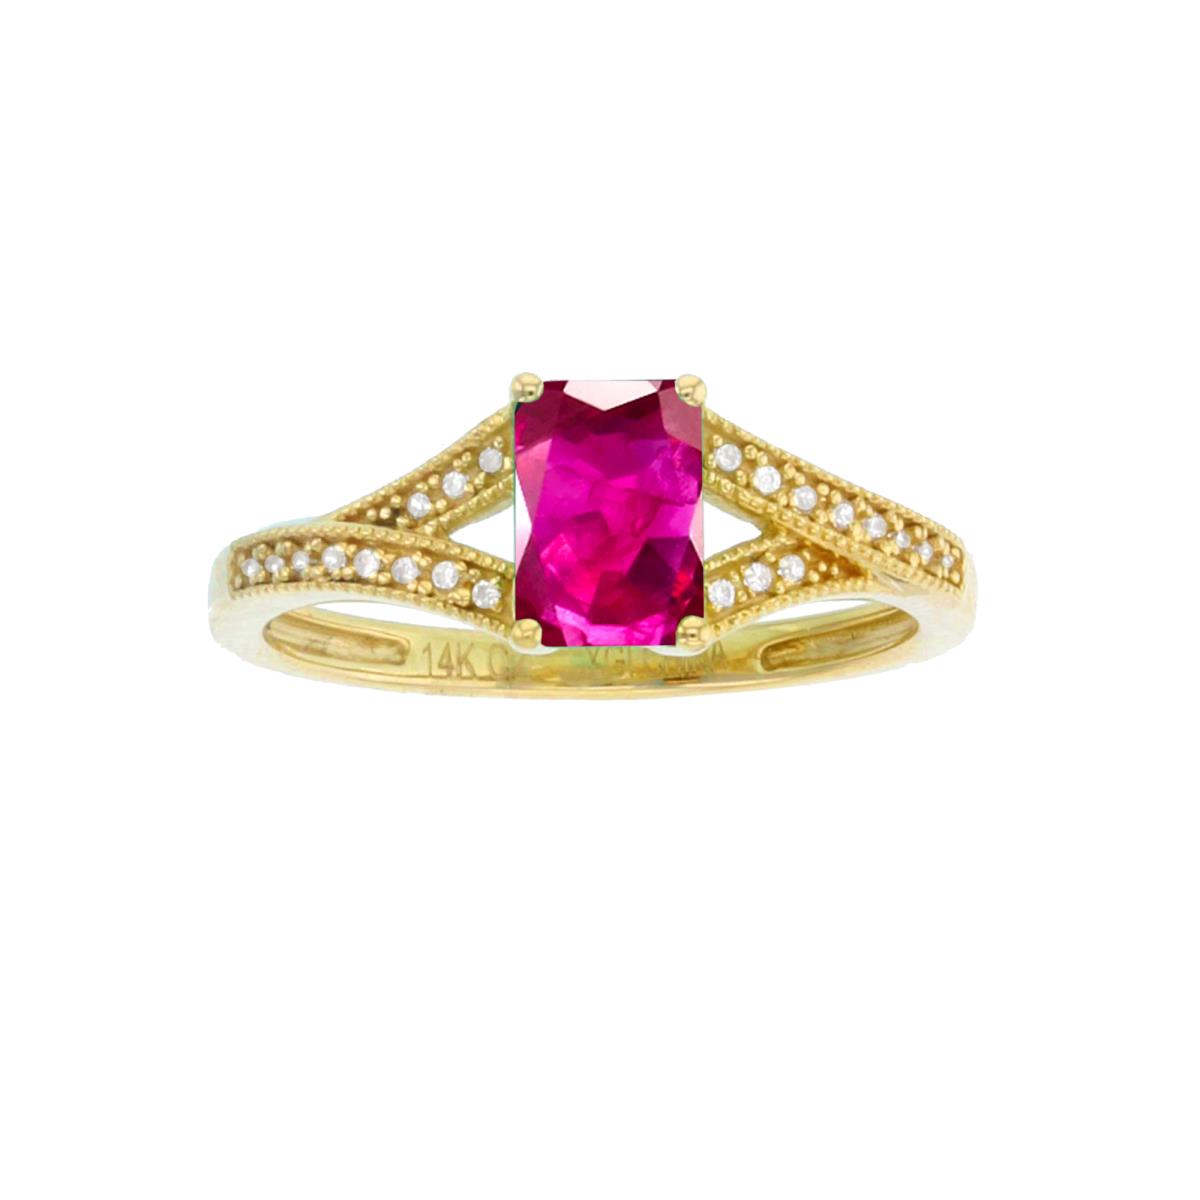 10K Yellow Gold 0.01cttw Rnd Diamonds & 7x5mm Oct Glass Filled Ruby Ring